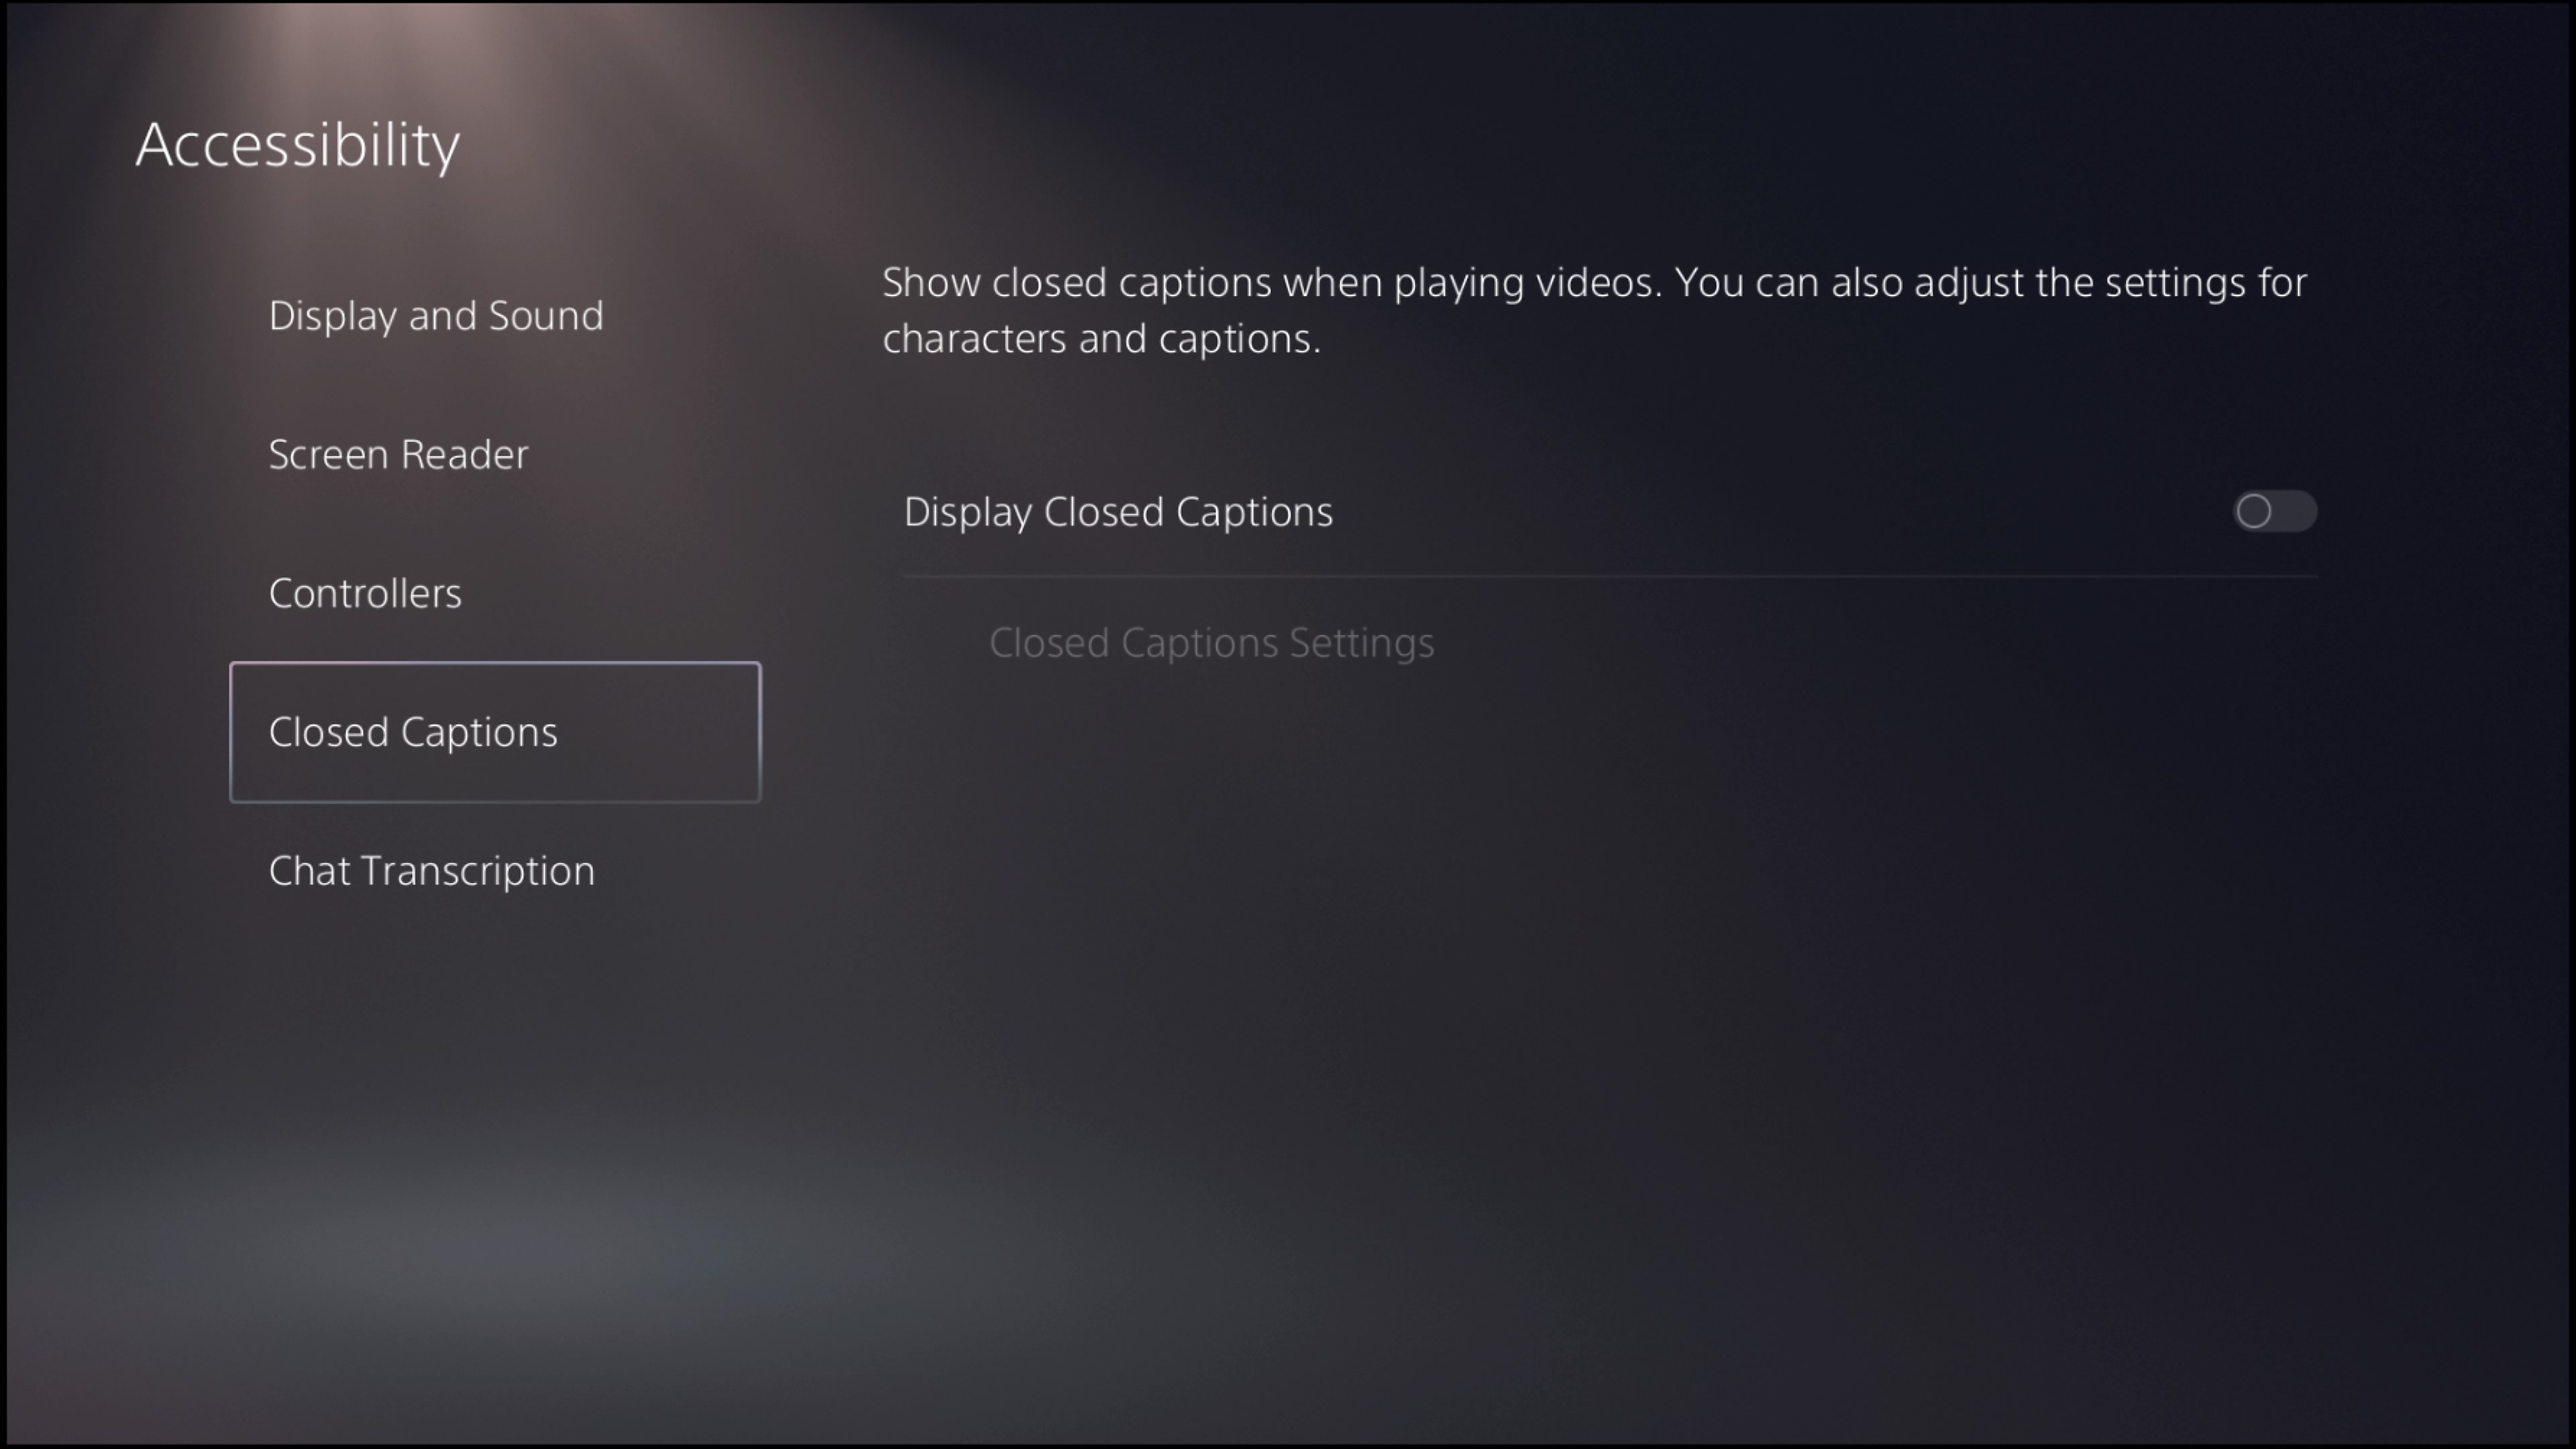 PS5 accessibility - closed captions